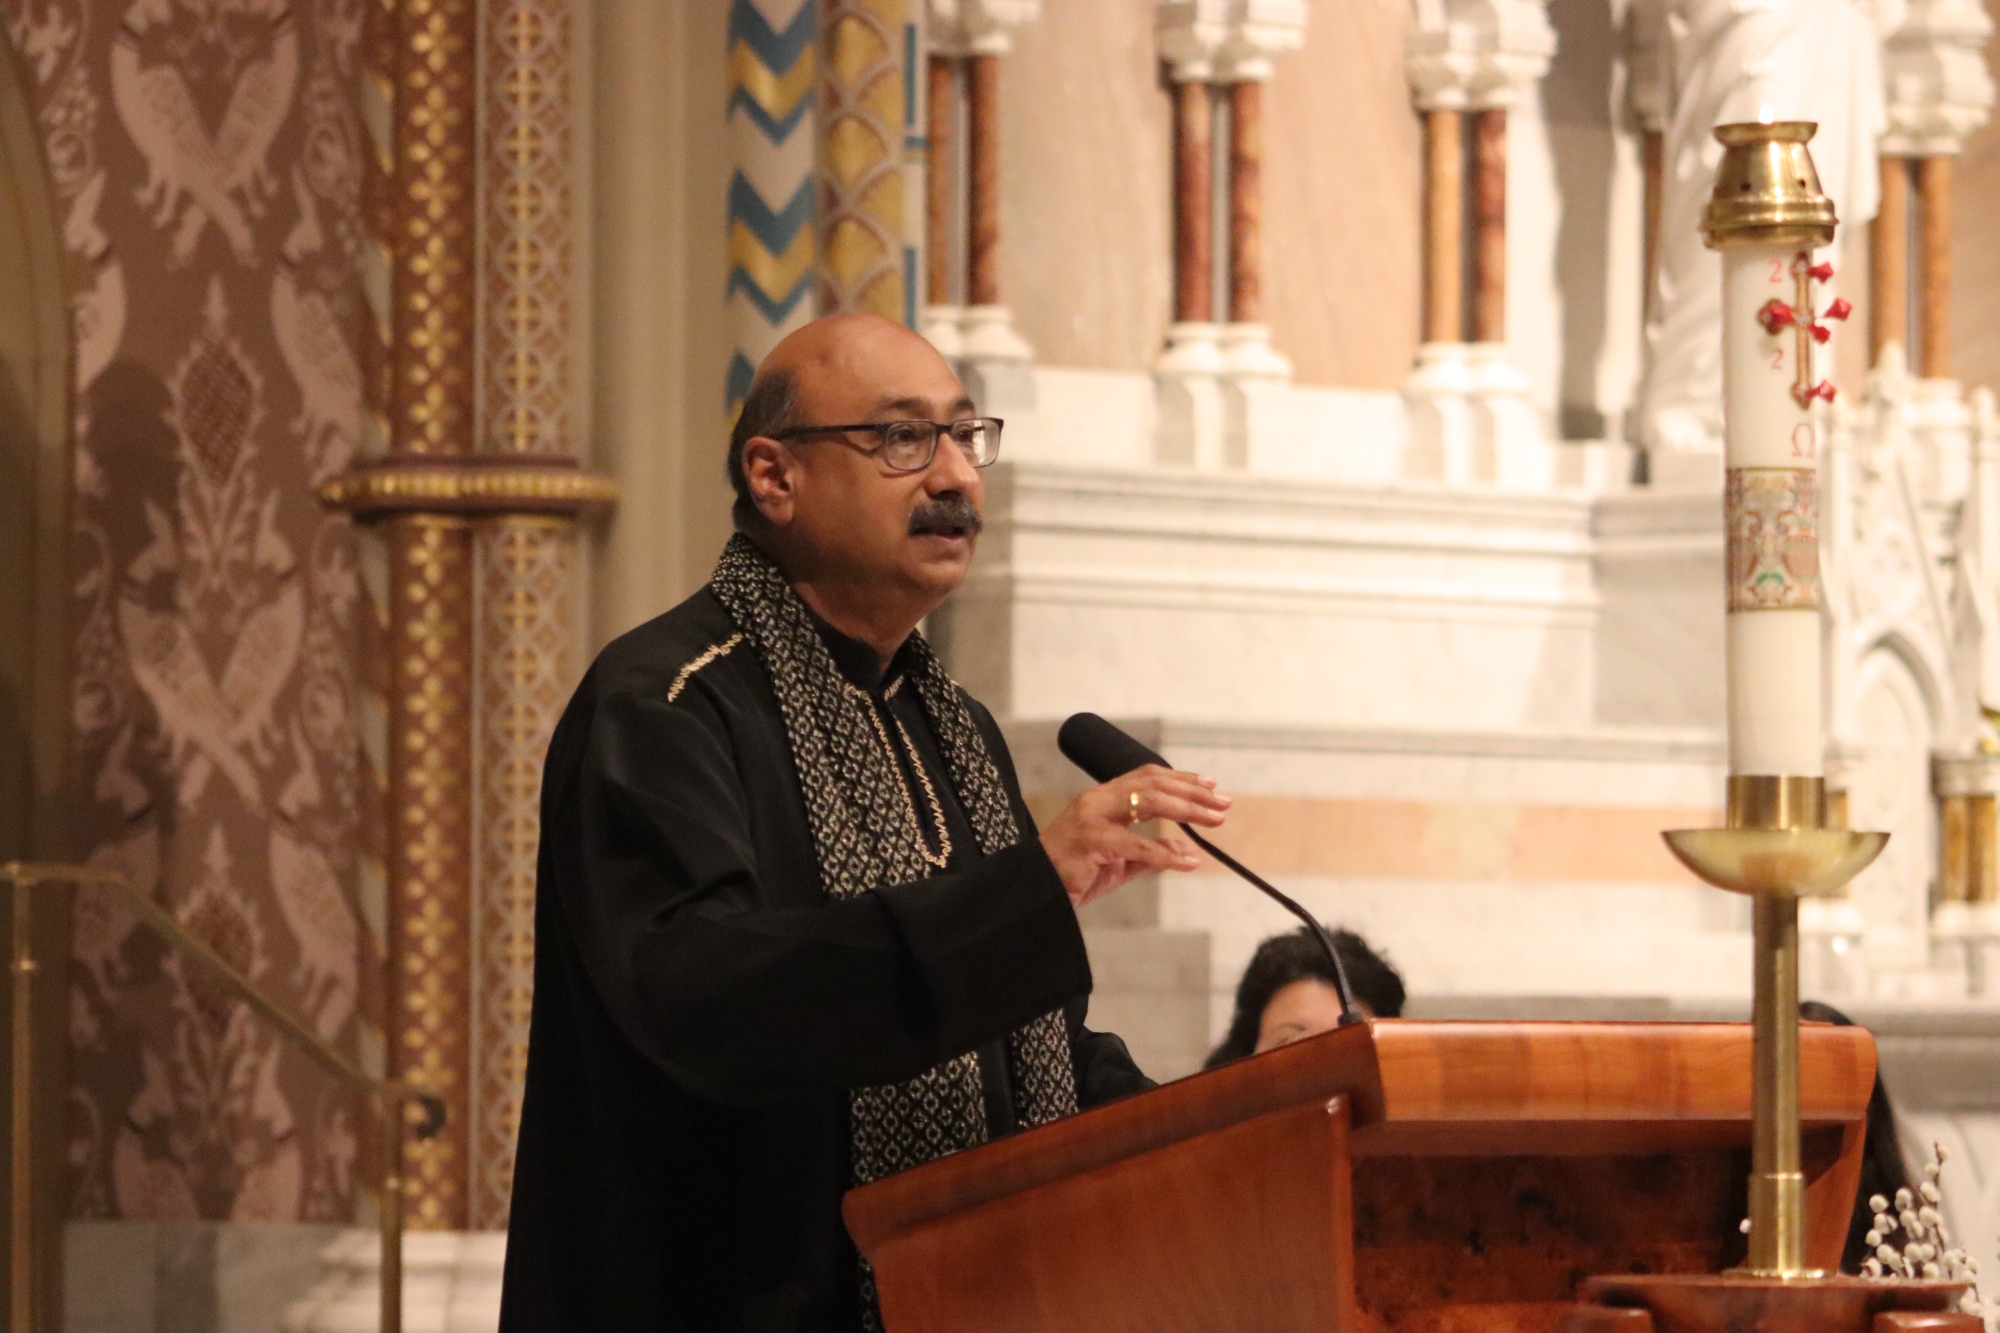 Aziz Nathoo speaks during the Baccalaureate service at Chestnut Hill College.